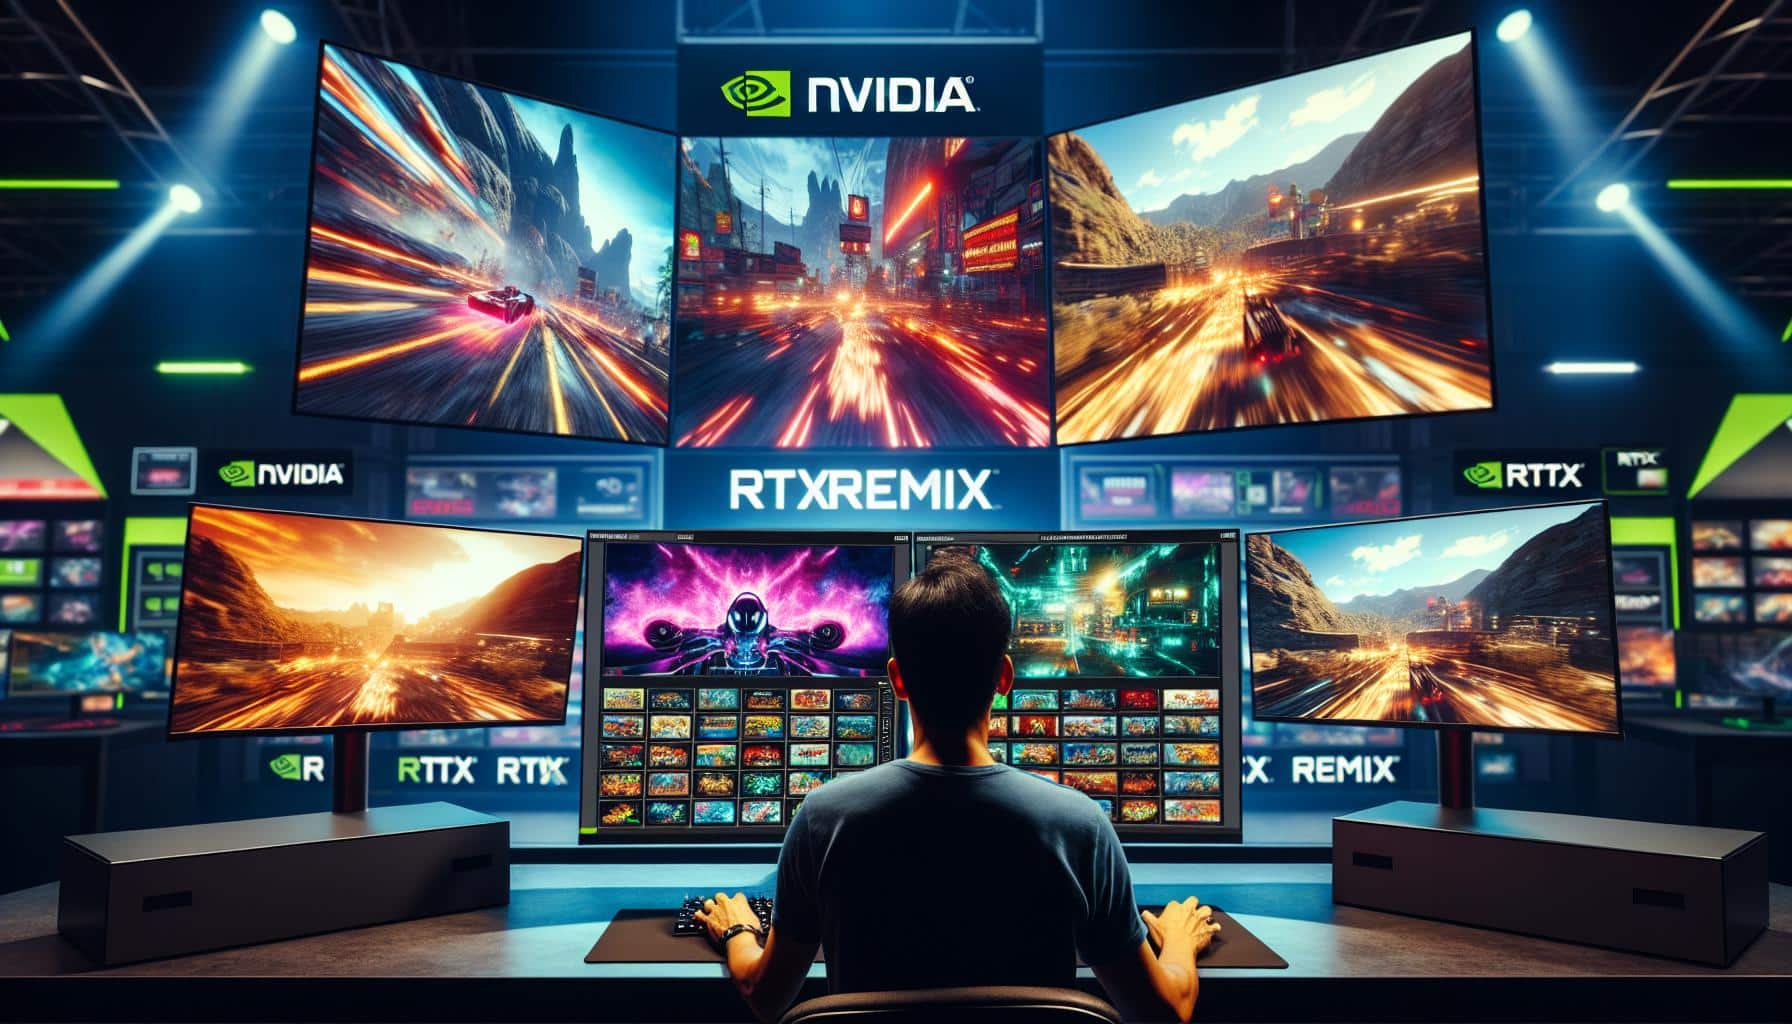 Is Nvidia's RTX Remix Enhancing Gaming or Reducing Quality? | FinOracle